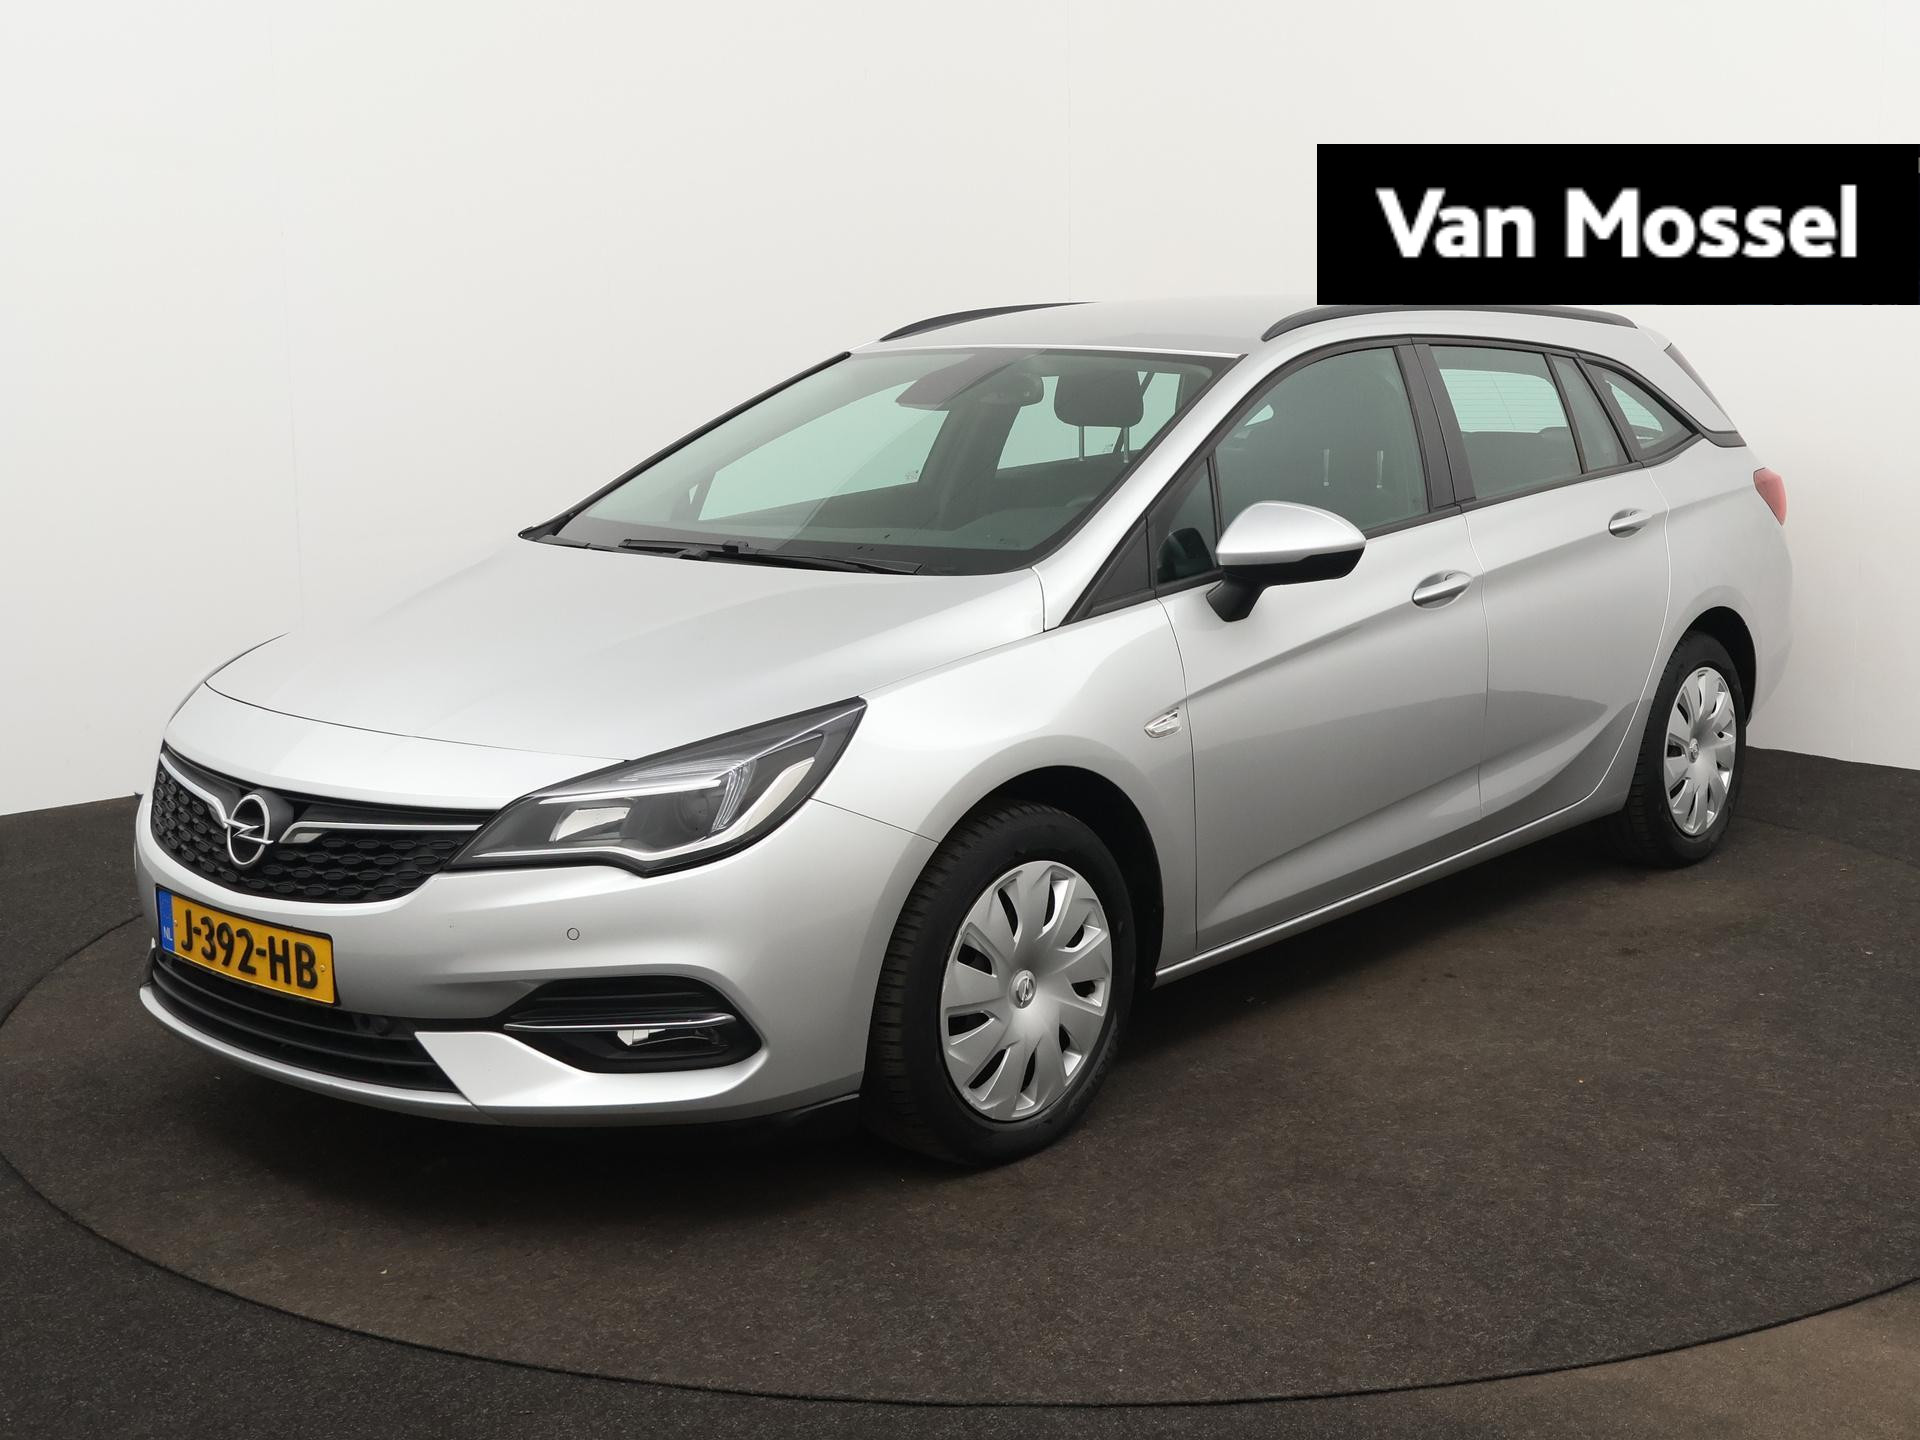 Opel Astra Sports Tourer 1.2 Business Edition